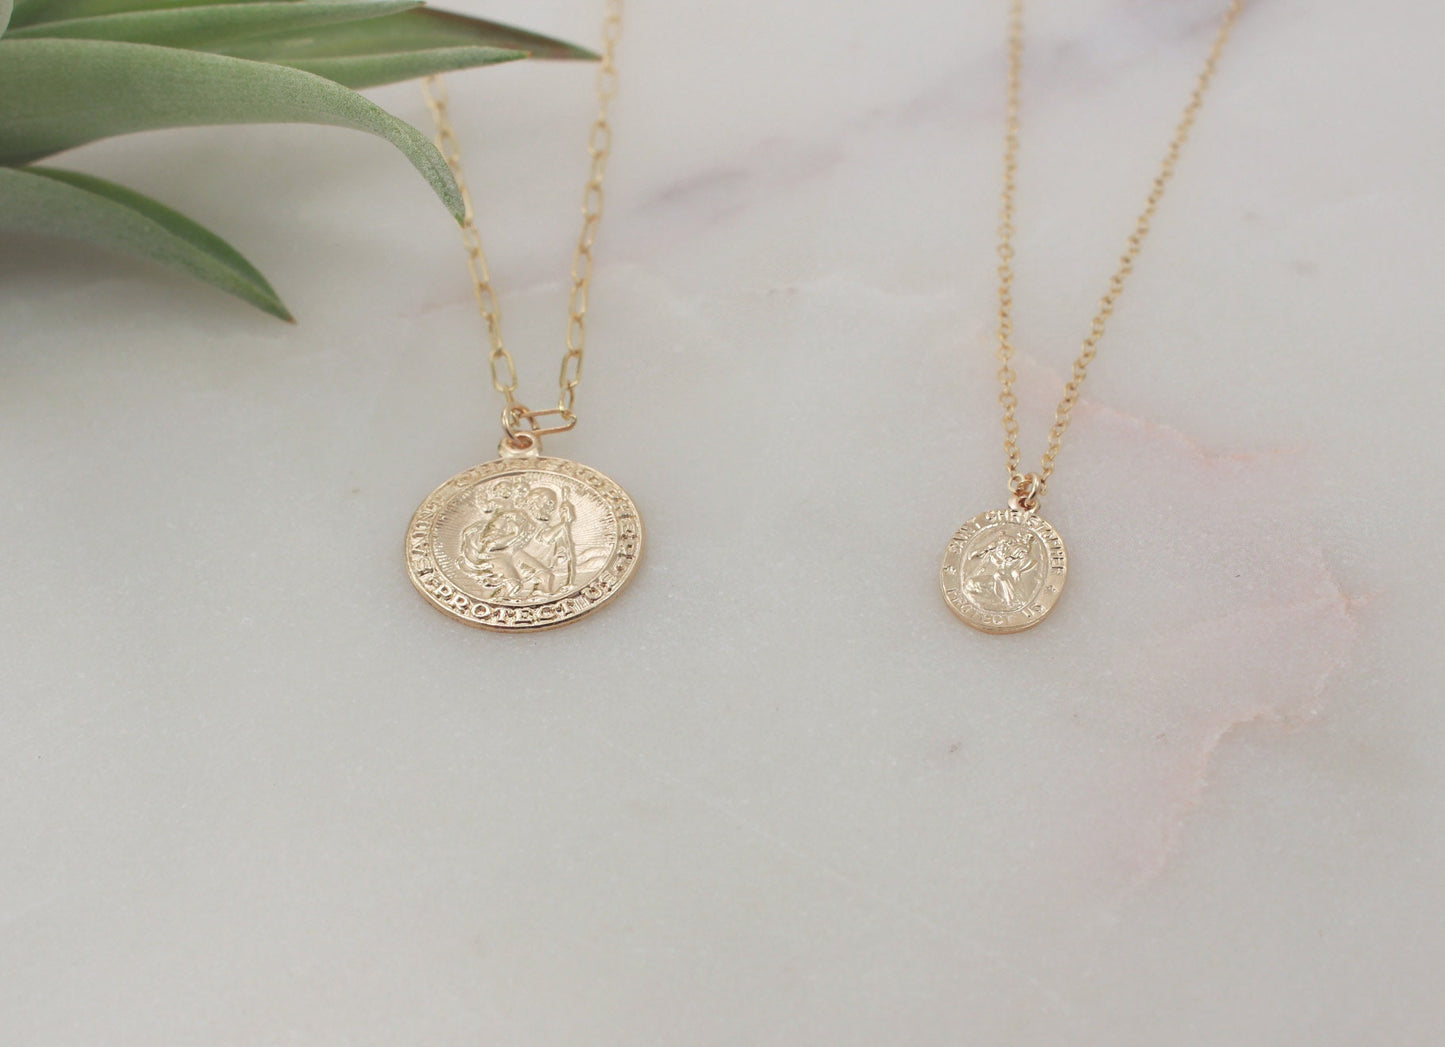 Gold Filled Medallion Necklace, St Christopher Charm, Oval(small) - 14k Gold Filled Charm and Chain, Charm Size 9x12mm